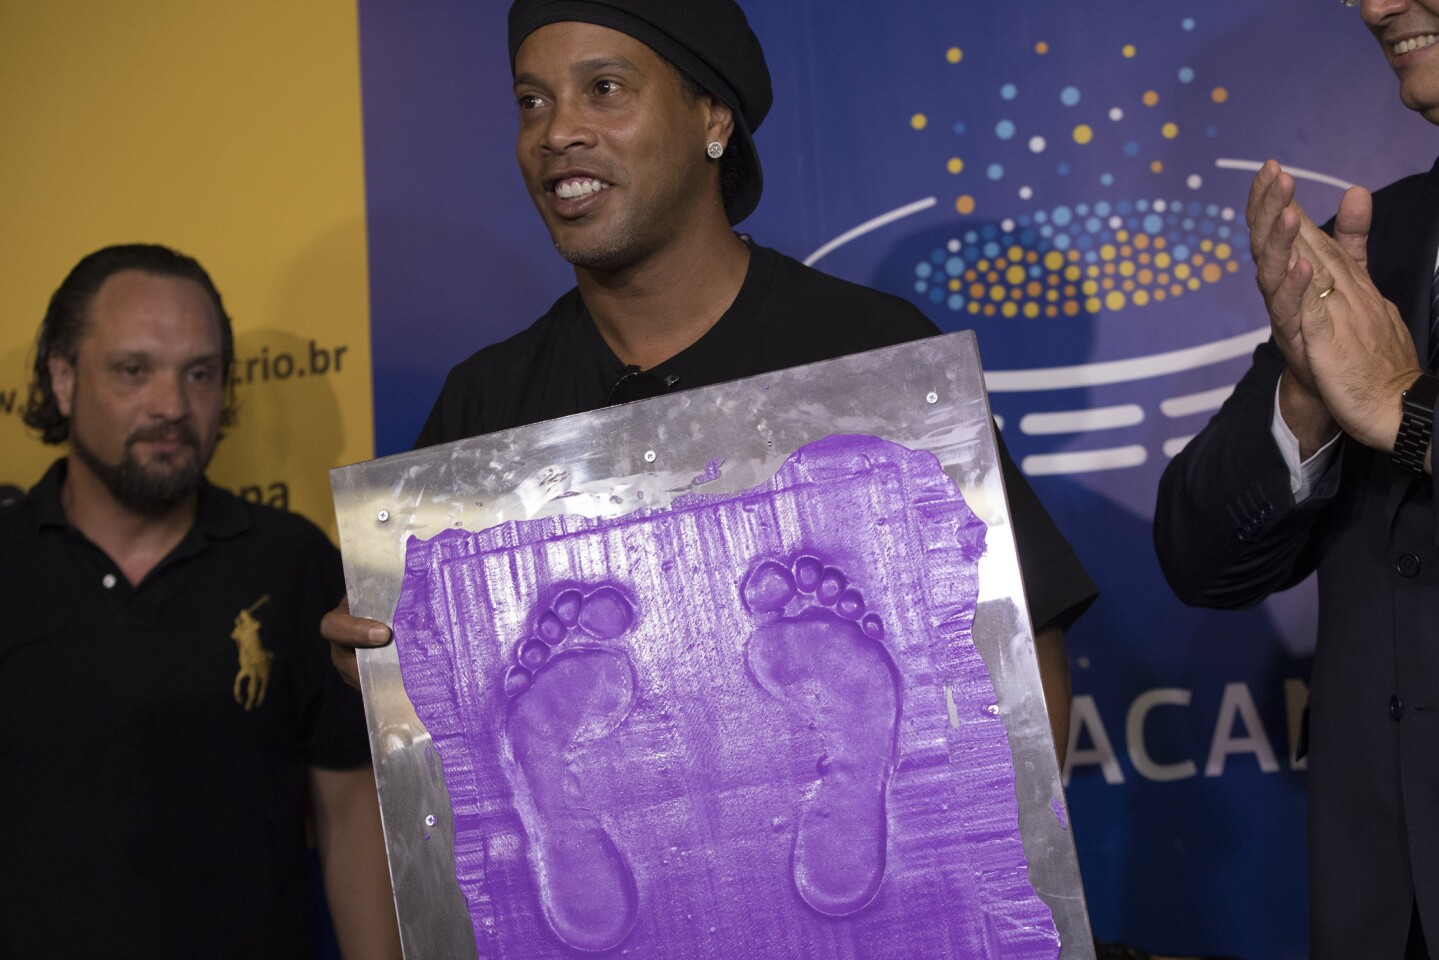 Brazil's former soccer player Ronaldinho Gaucho holds a print of his feet that will be placed on Brazil's Soccer Walk of Fame at Maracana stadium in Rio de Janeiro, Brazil, Tuesday, Jan. 8, 2019. Ronaldinho was twice named FIFA World Player of the Year. (AP Photo/Leo Correa)